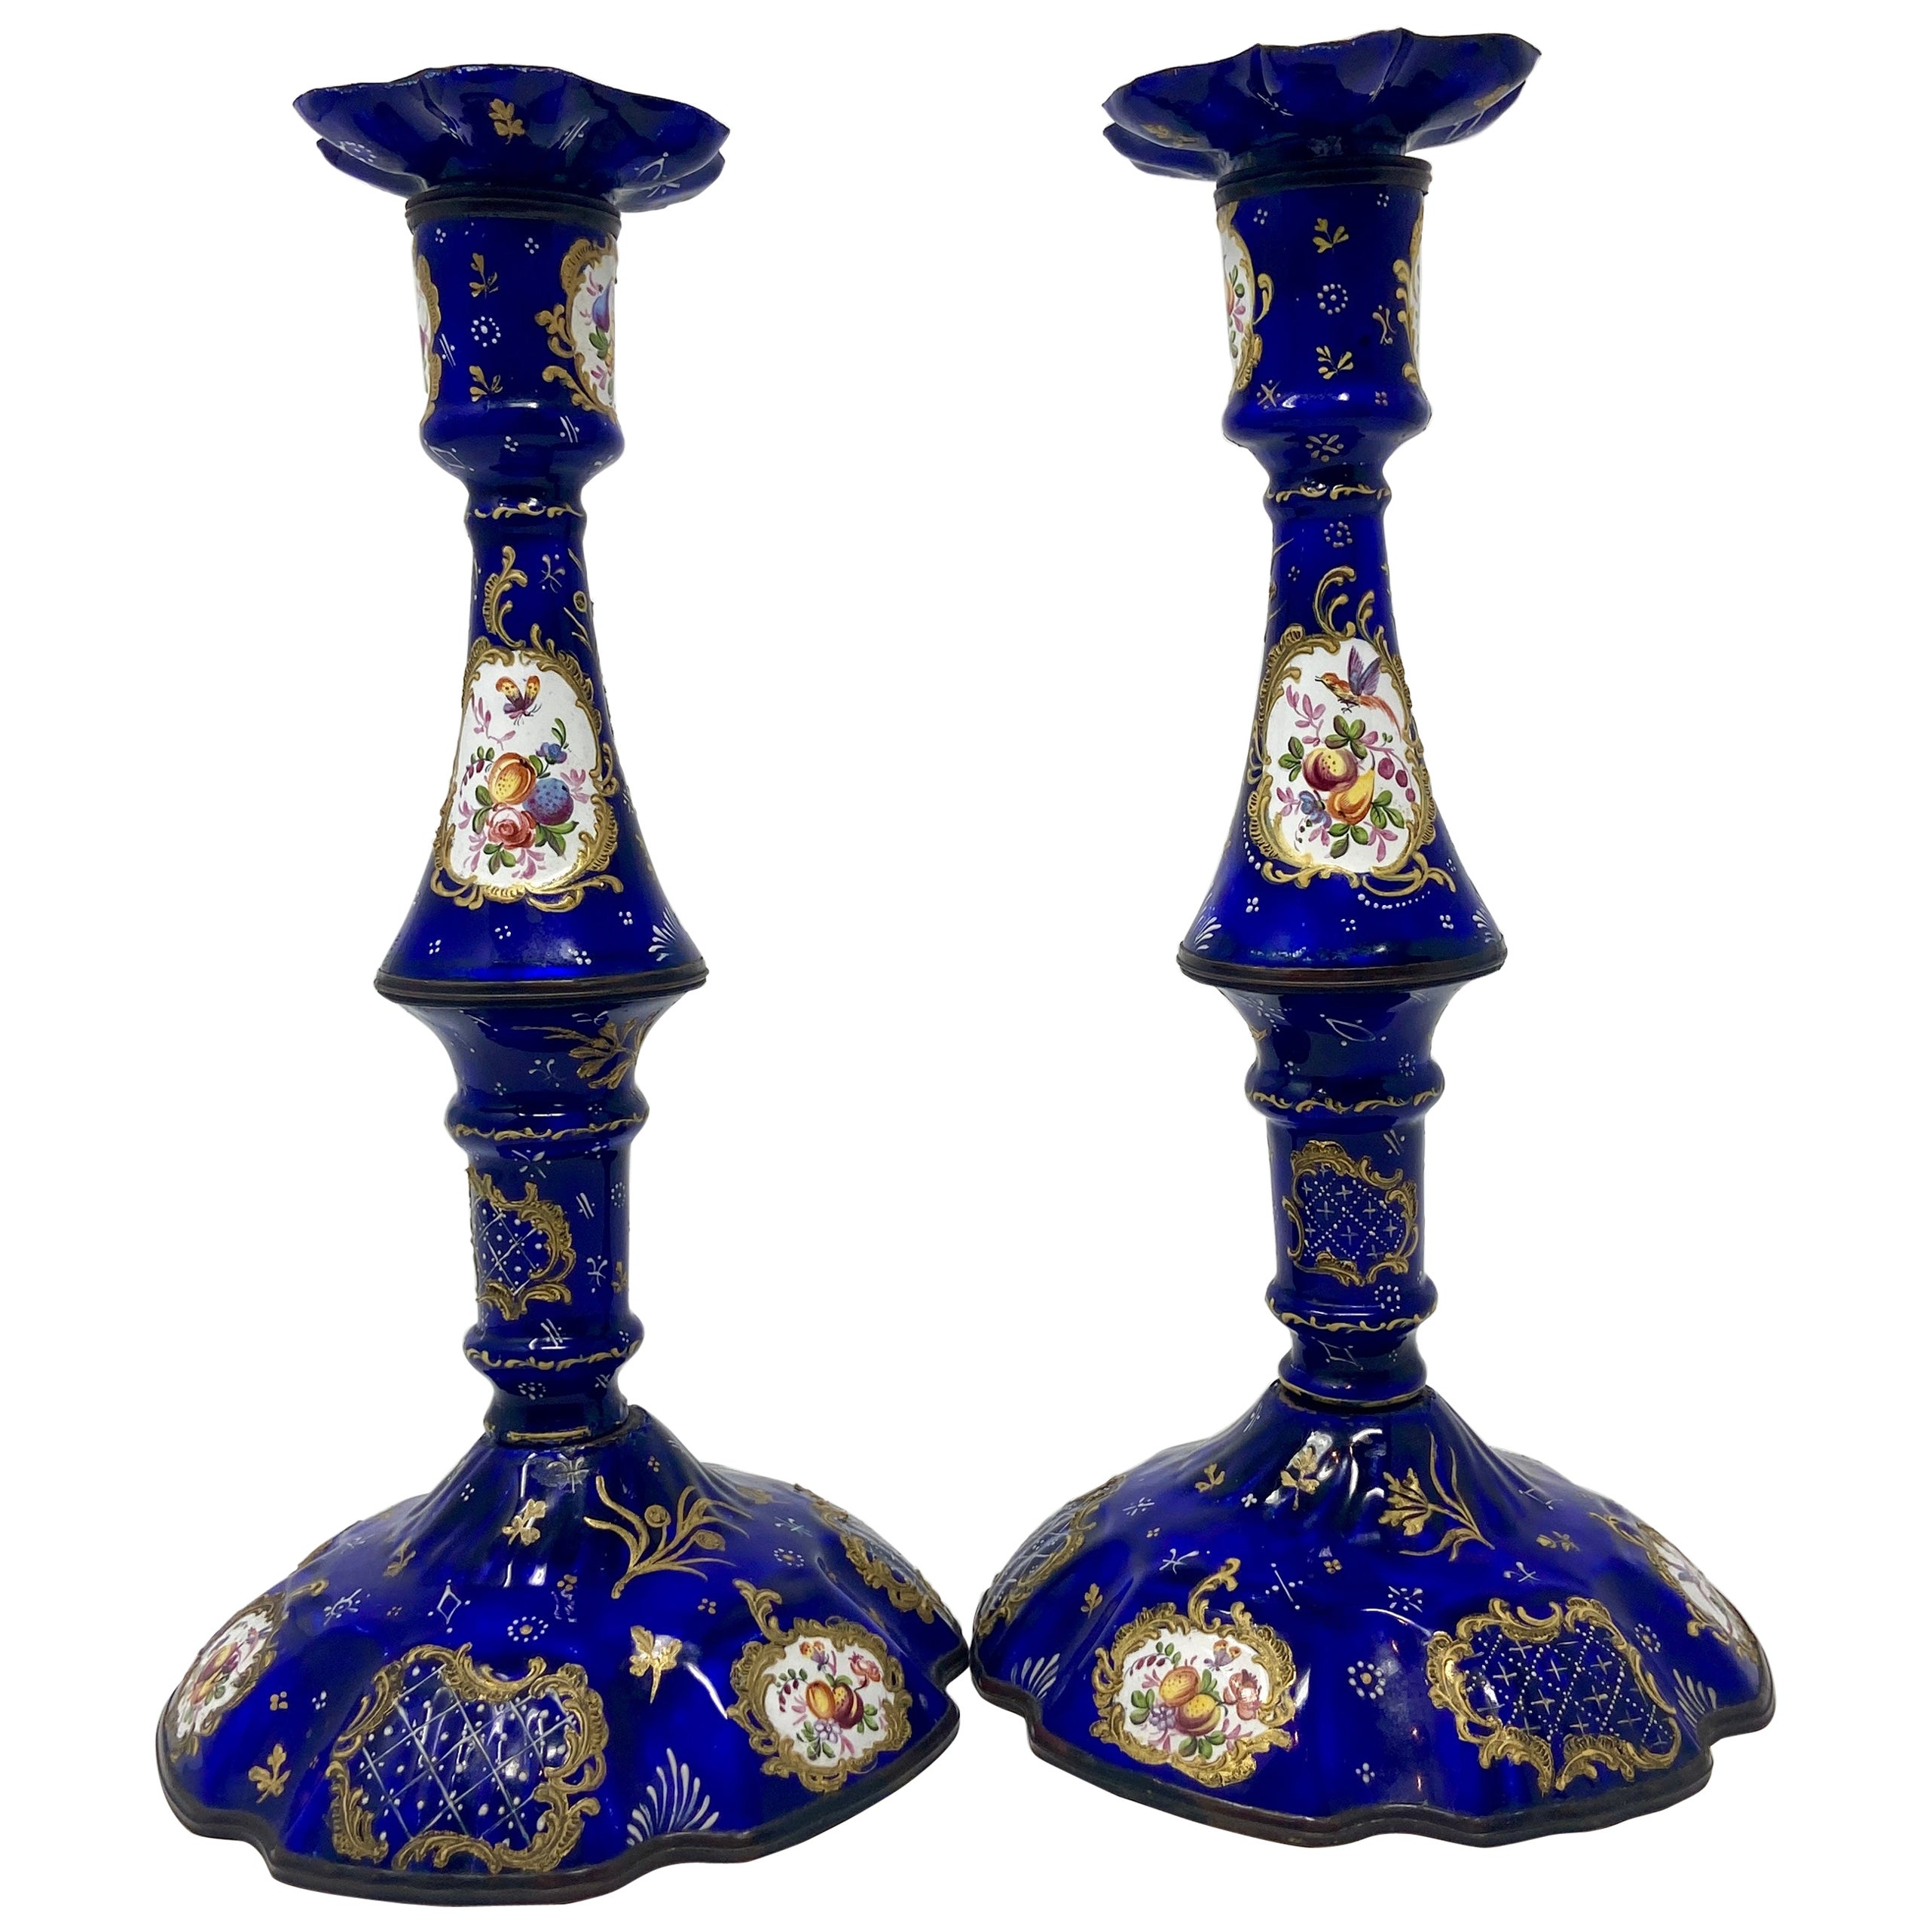 Pair Antique French Hand-Painted Blue Enameled Porcelain Candlesticks Circa 1840